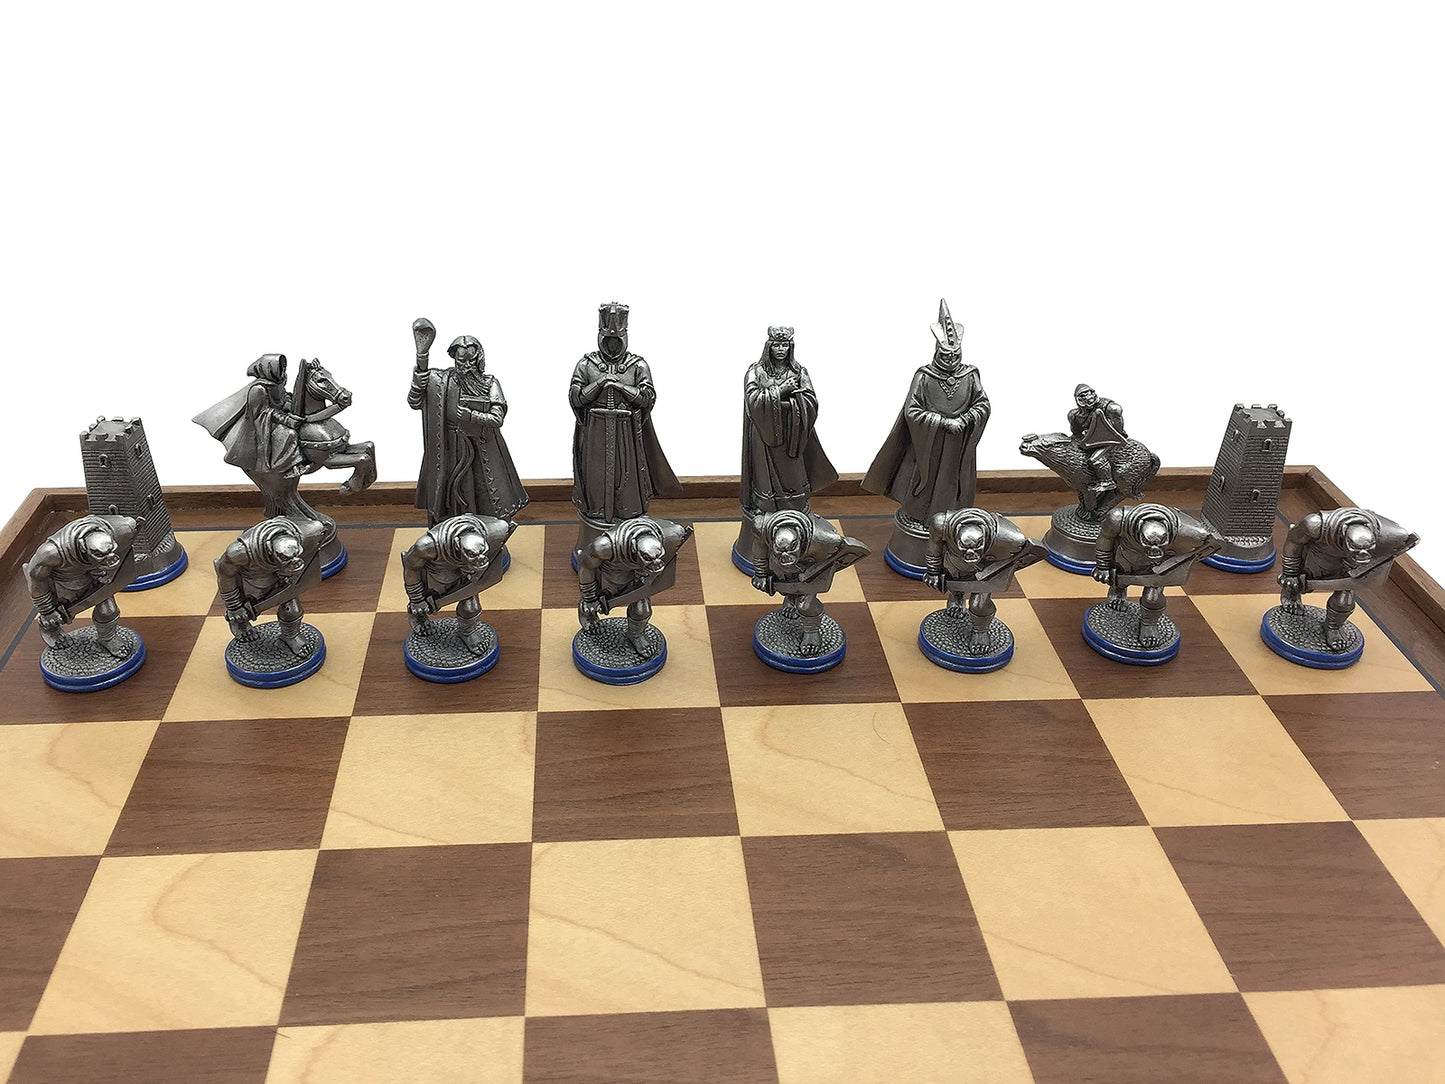 Toy soldier miniature army men Fantasy Chess Set. With board.